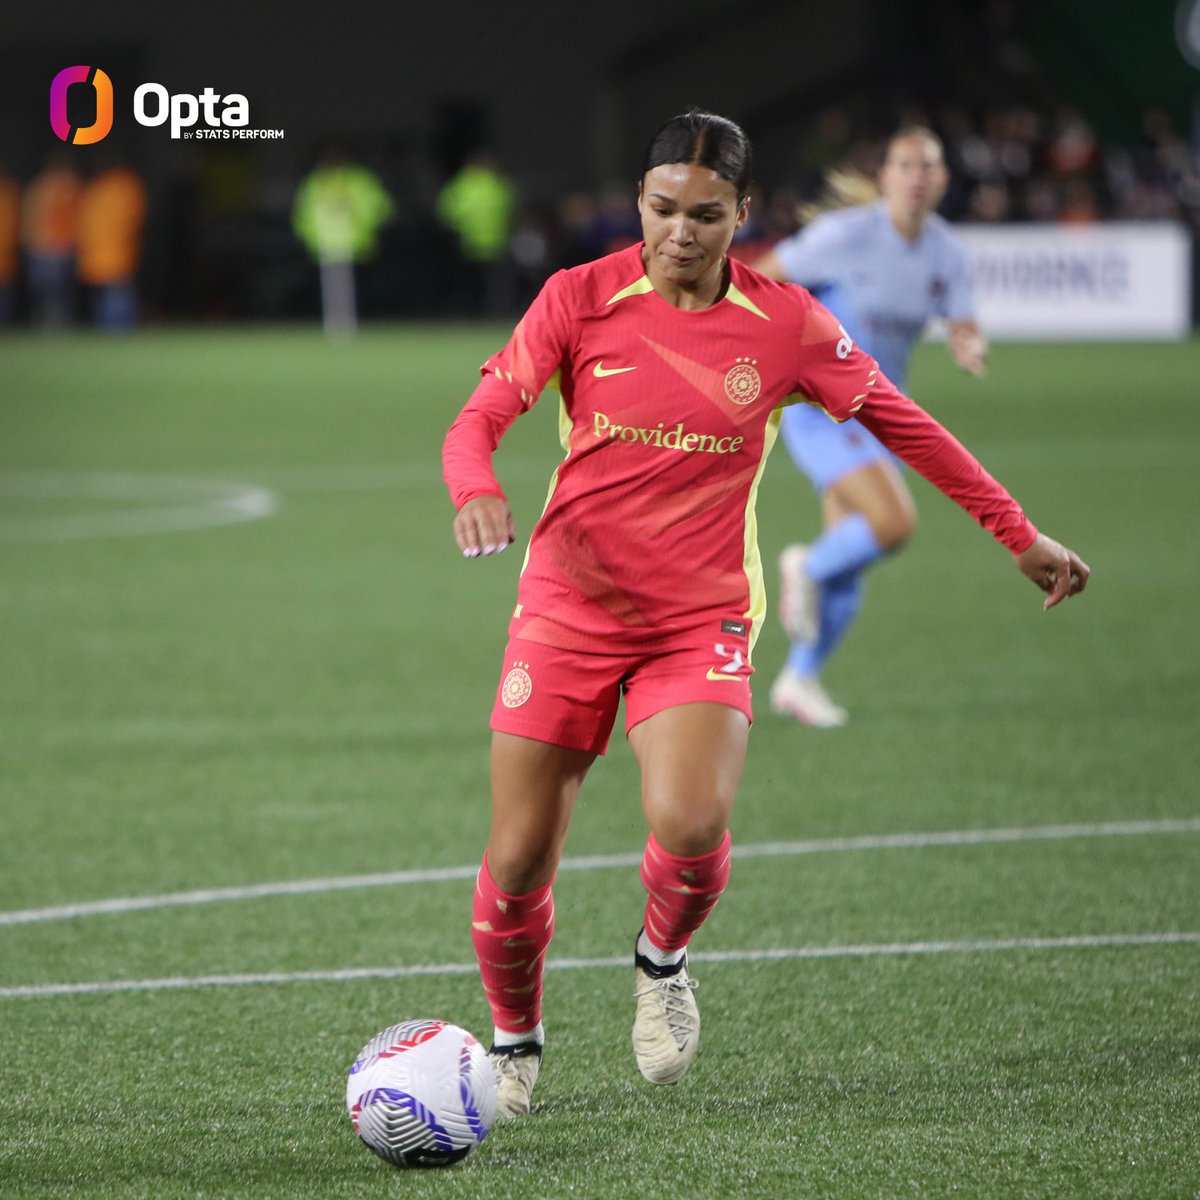 13 - With her goal against Bay FC, @ThornsFC's Sophia Smith has scored at least once against all 13 opponents she's faced in her #NWSL career. Checklist.